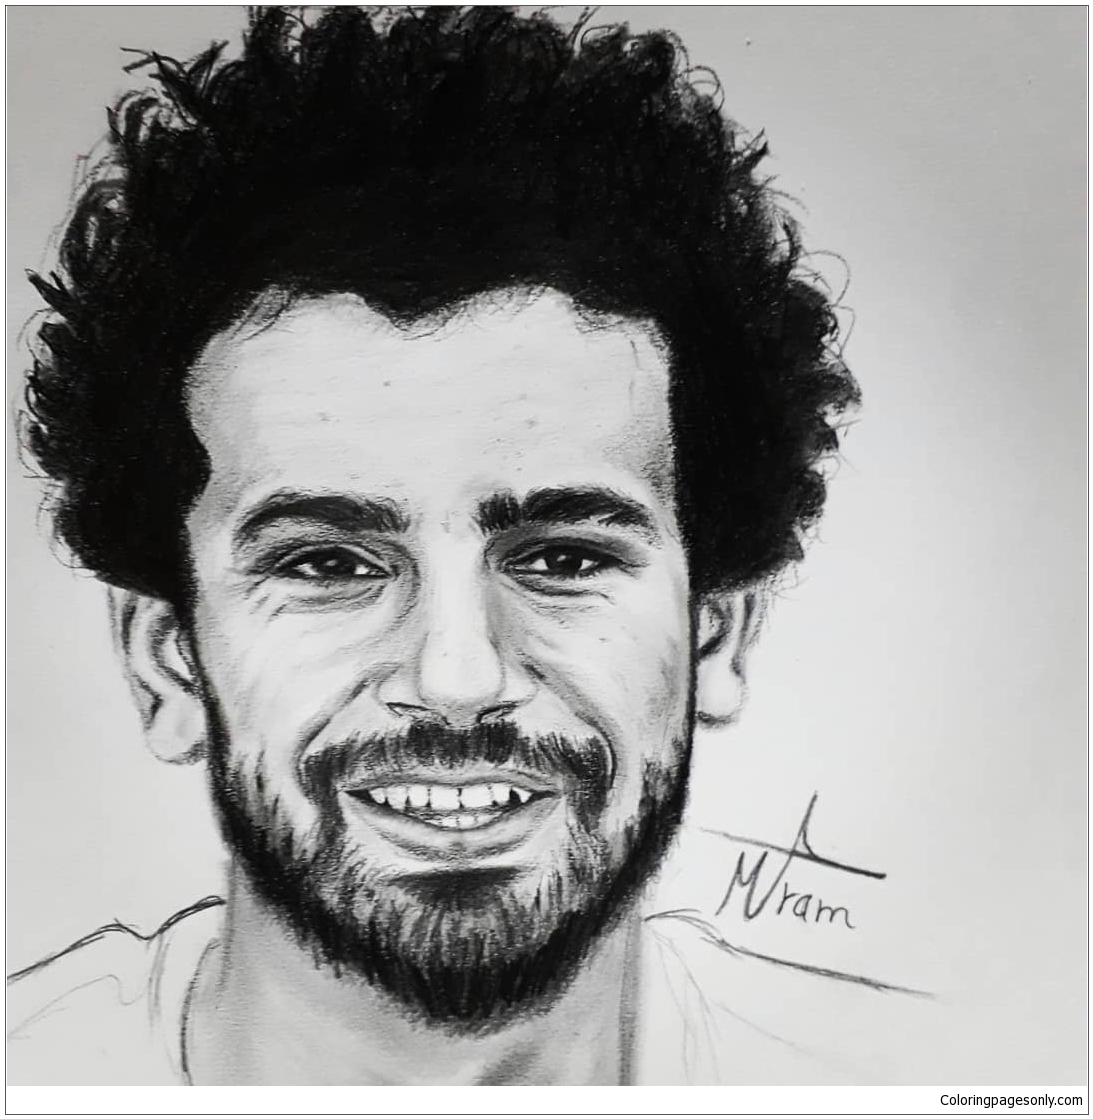 Mohamed Salah-image 6 Coloring Pages